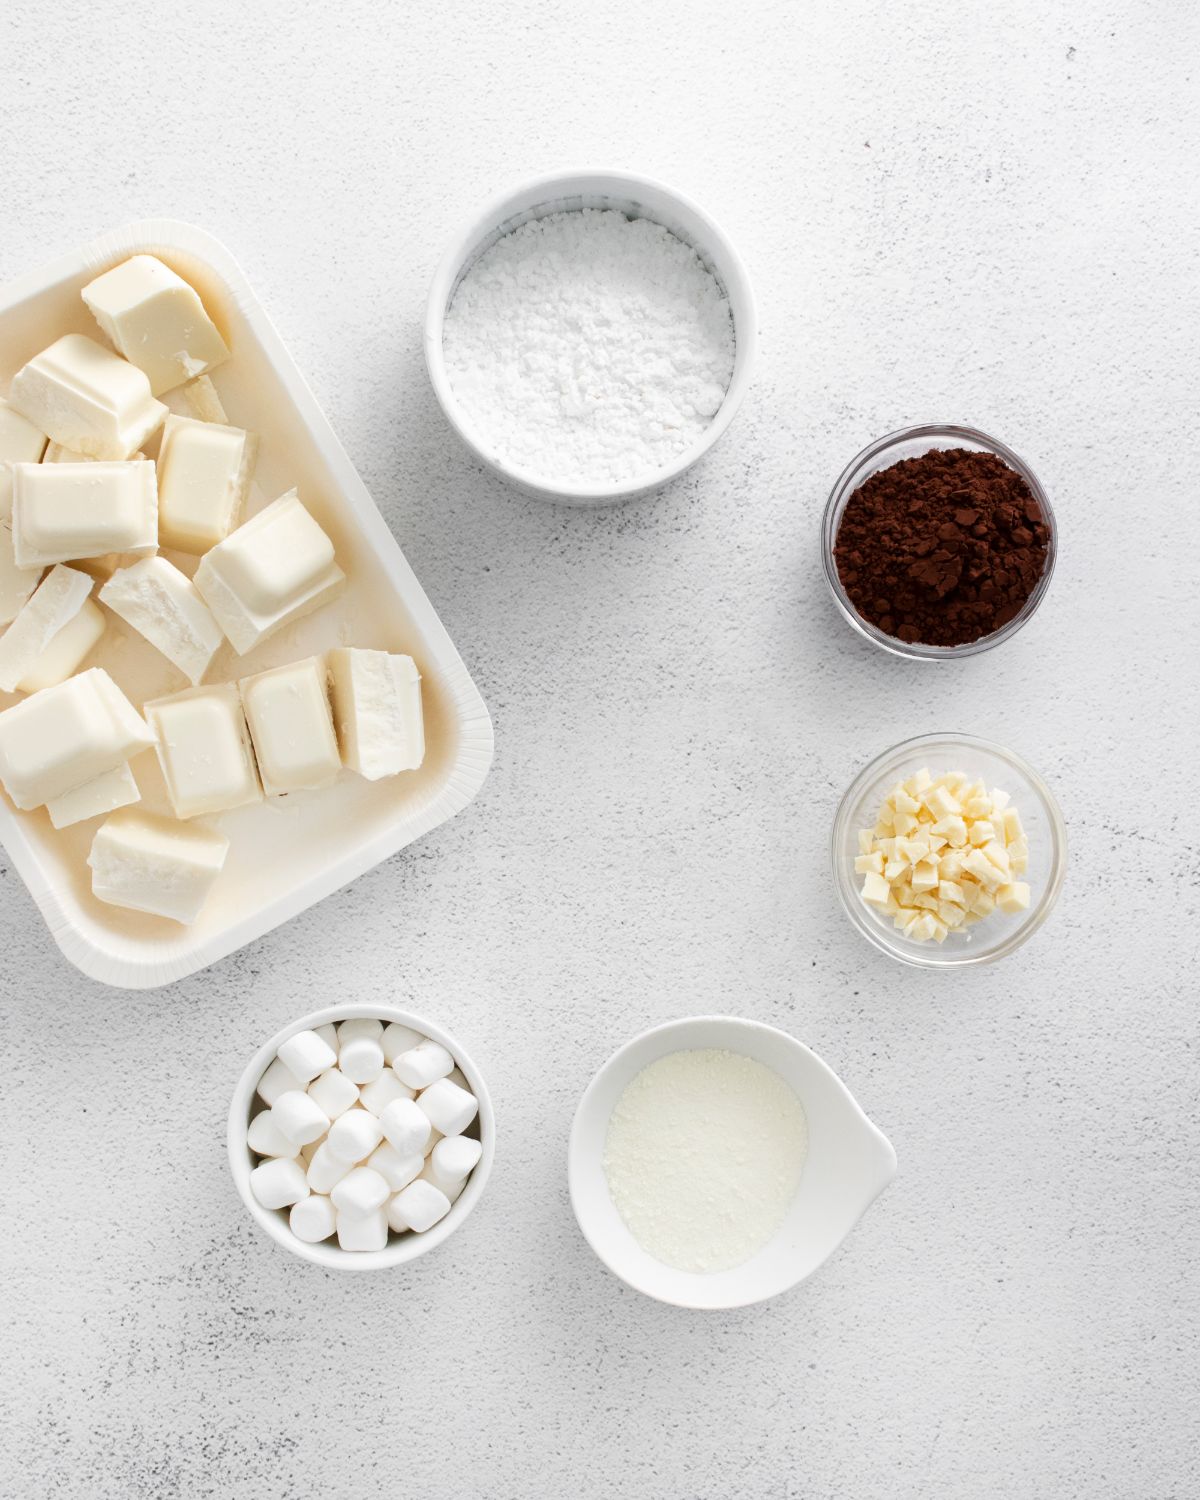 Ingredients used to make White Chocolate Hot Cocoa Bombs